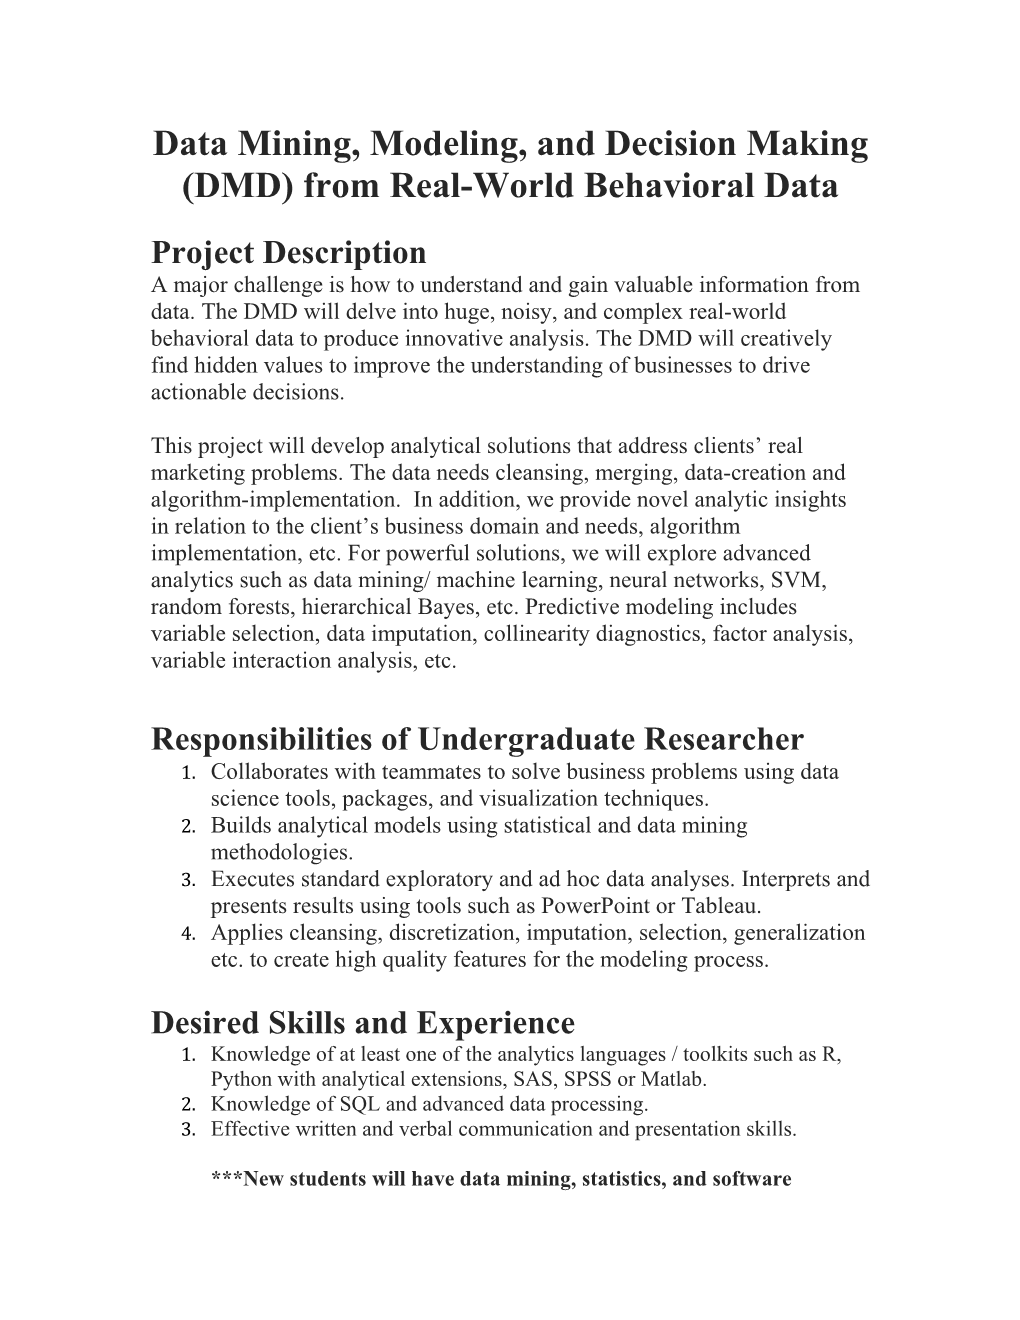 Data Mining, Modeling, and Decisionmaking (DMD) from Real-World Behavioral Data